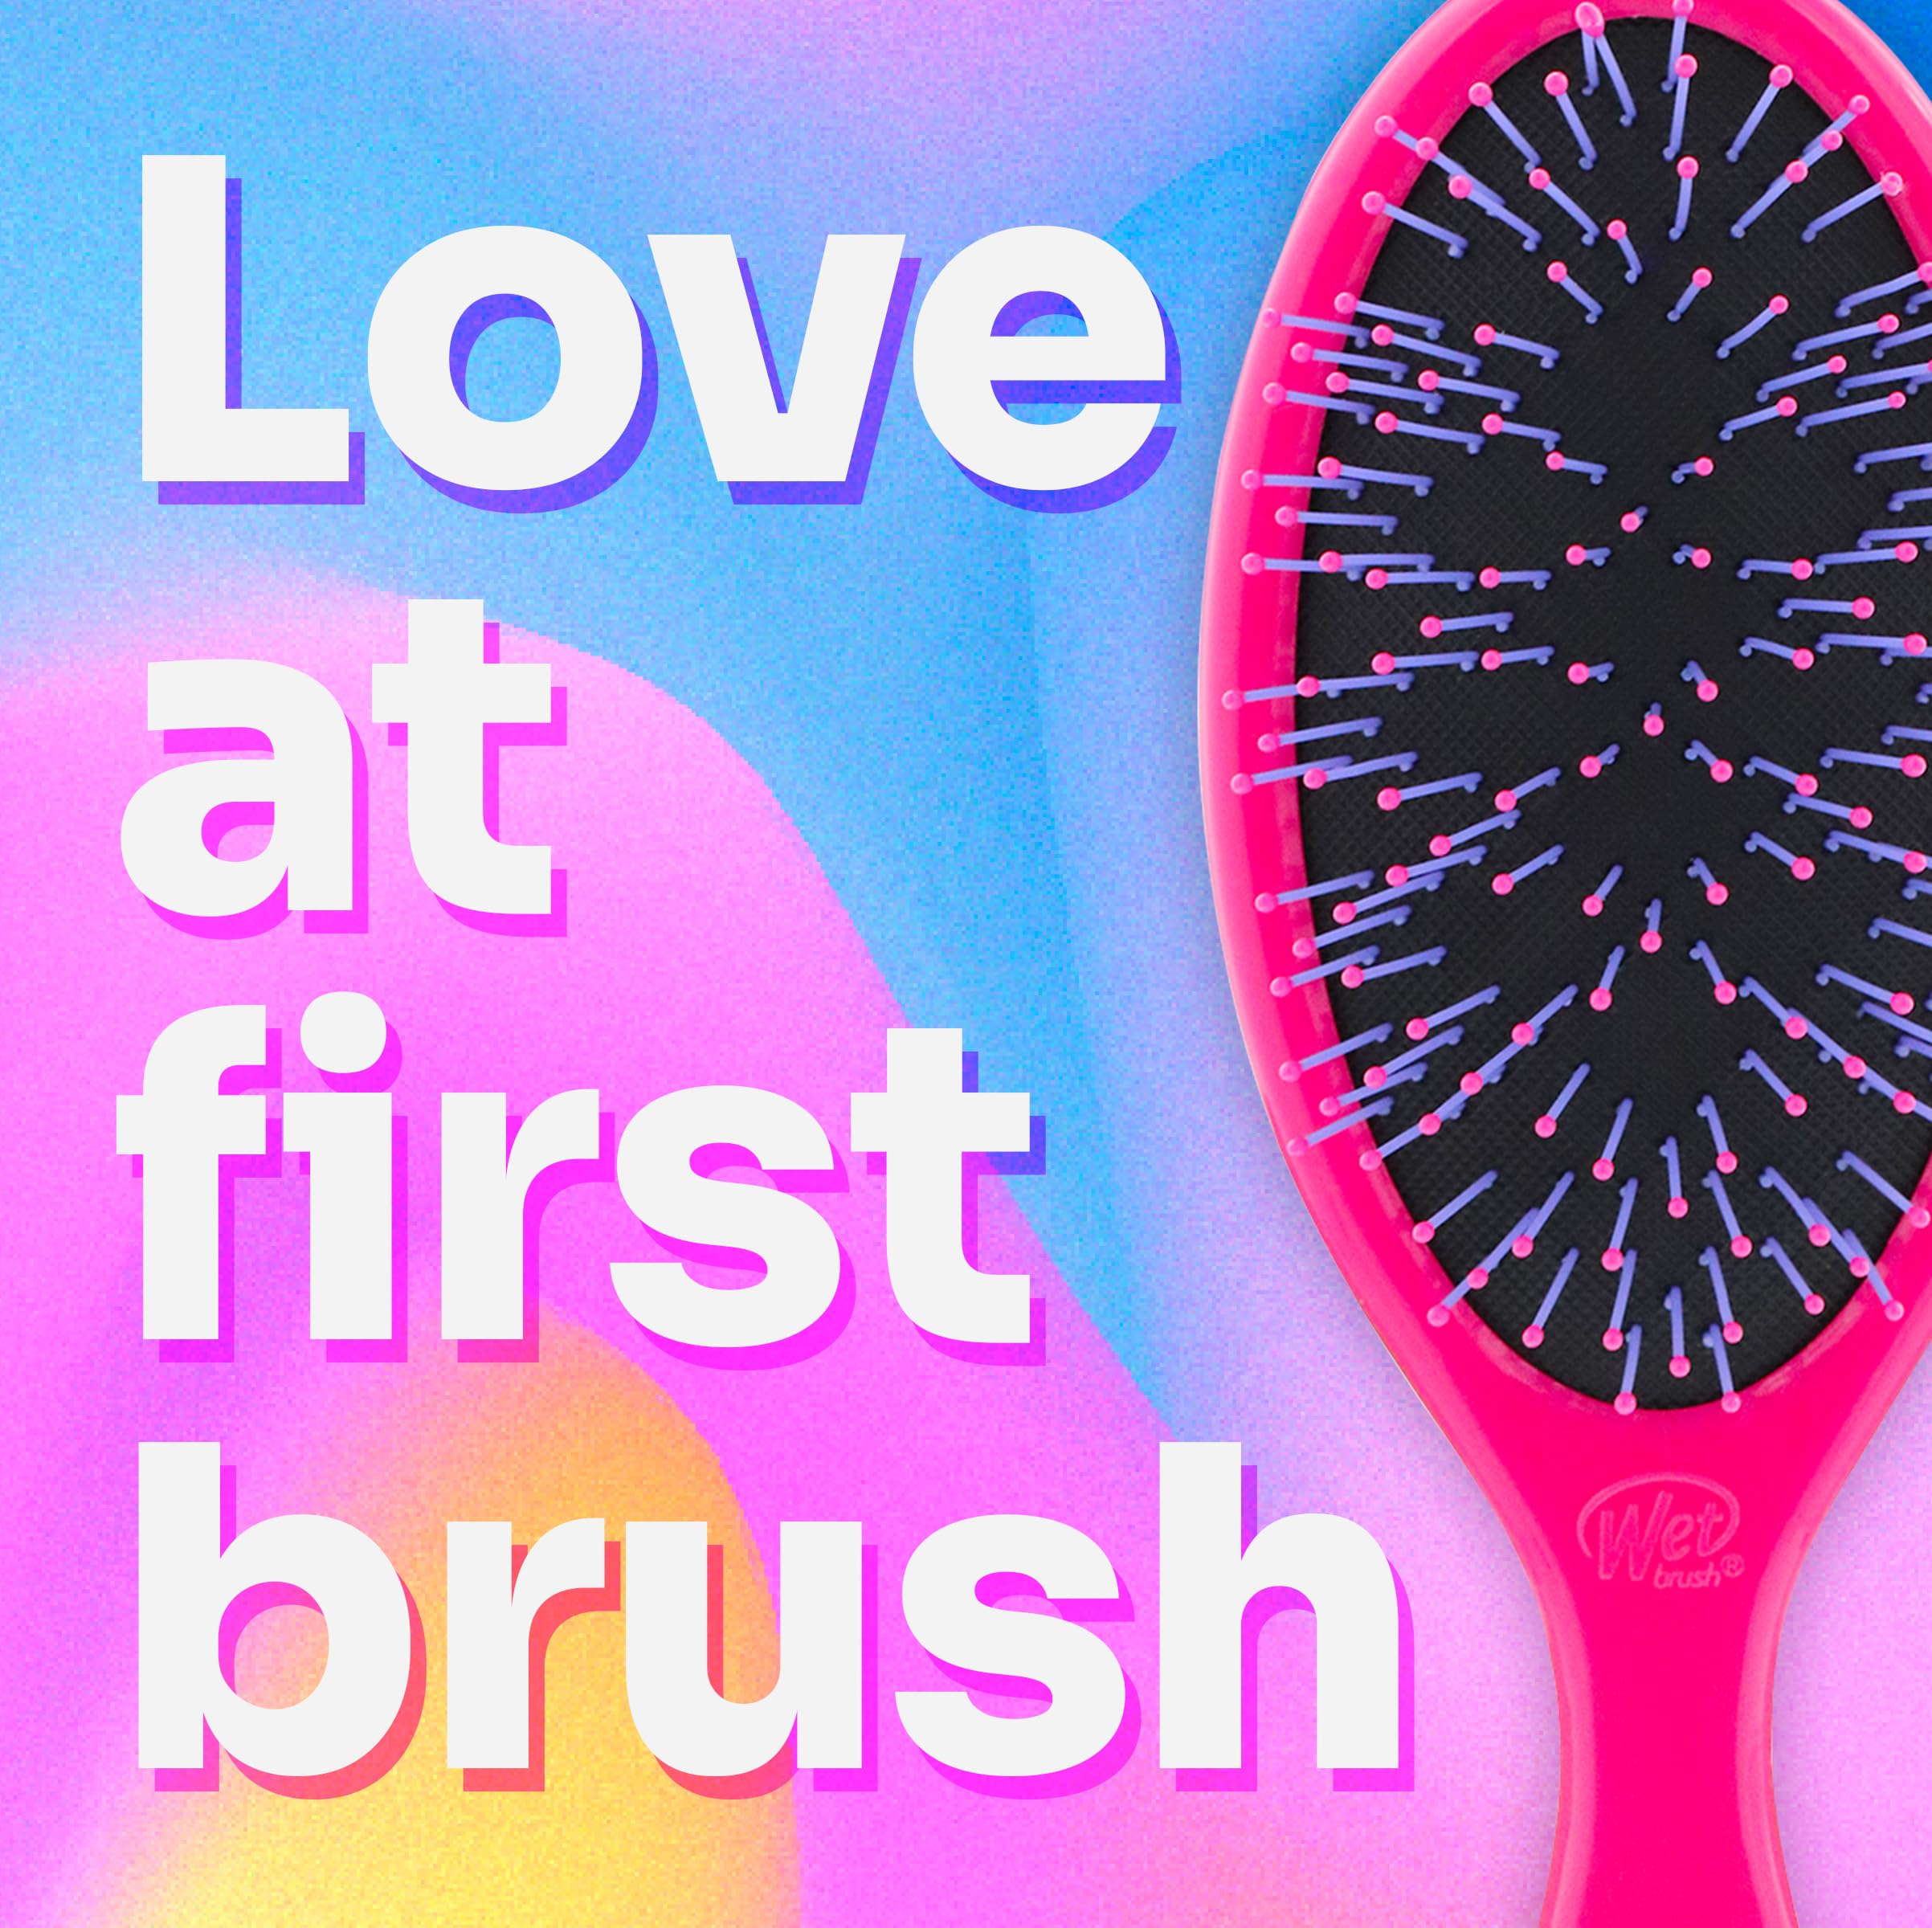 Wet Brush Thick Hair Detangling Brush, Pink - Detangler Brush with Soft & Flexible Bristles in a Unique Cluster Pattern - Tangle-Free Brush - For Thick, Curly, & Coarse Hair - For Women & Men